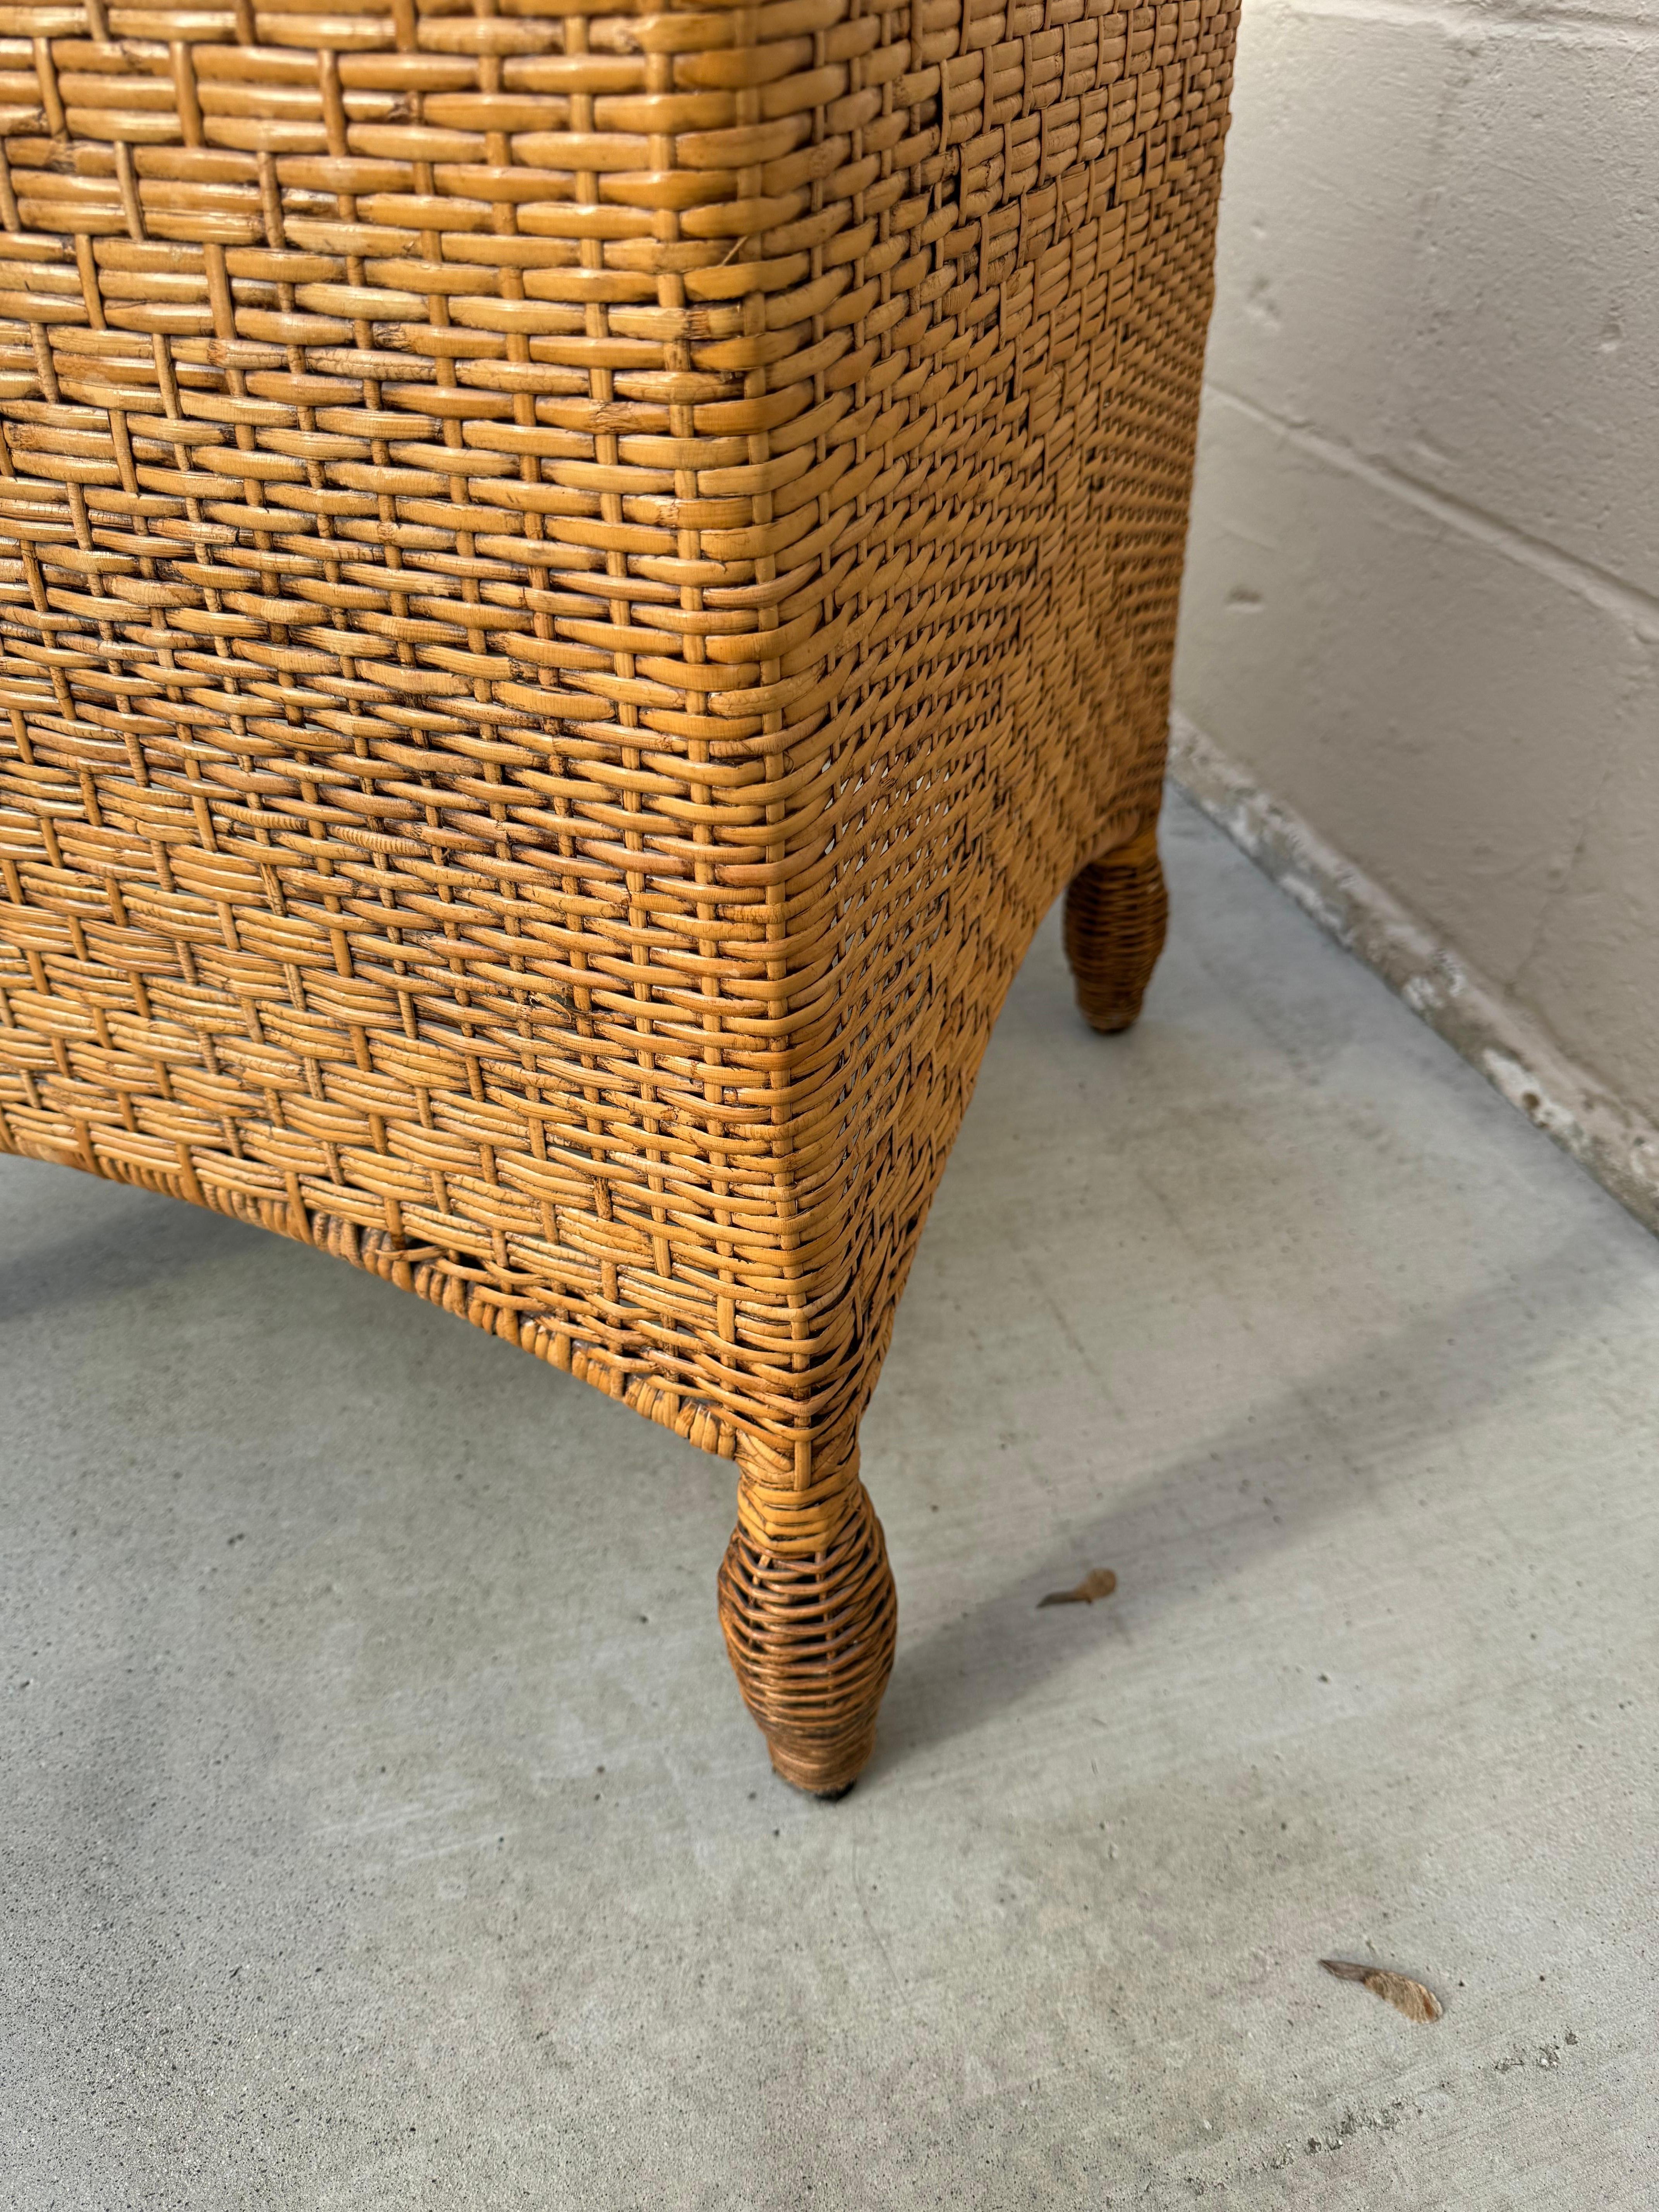 Hand-Woven 1970's Boho Chic Wicker or Rattan Table For Sale